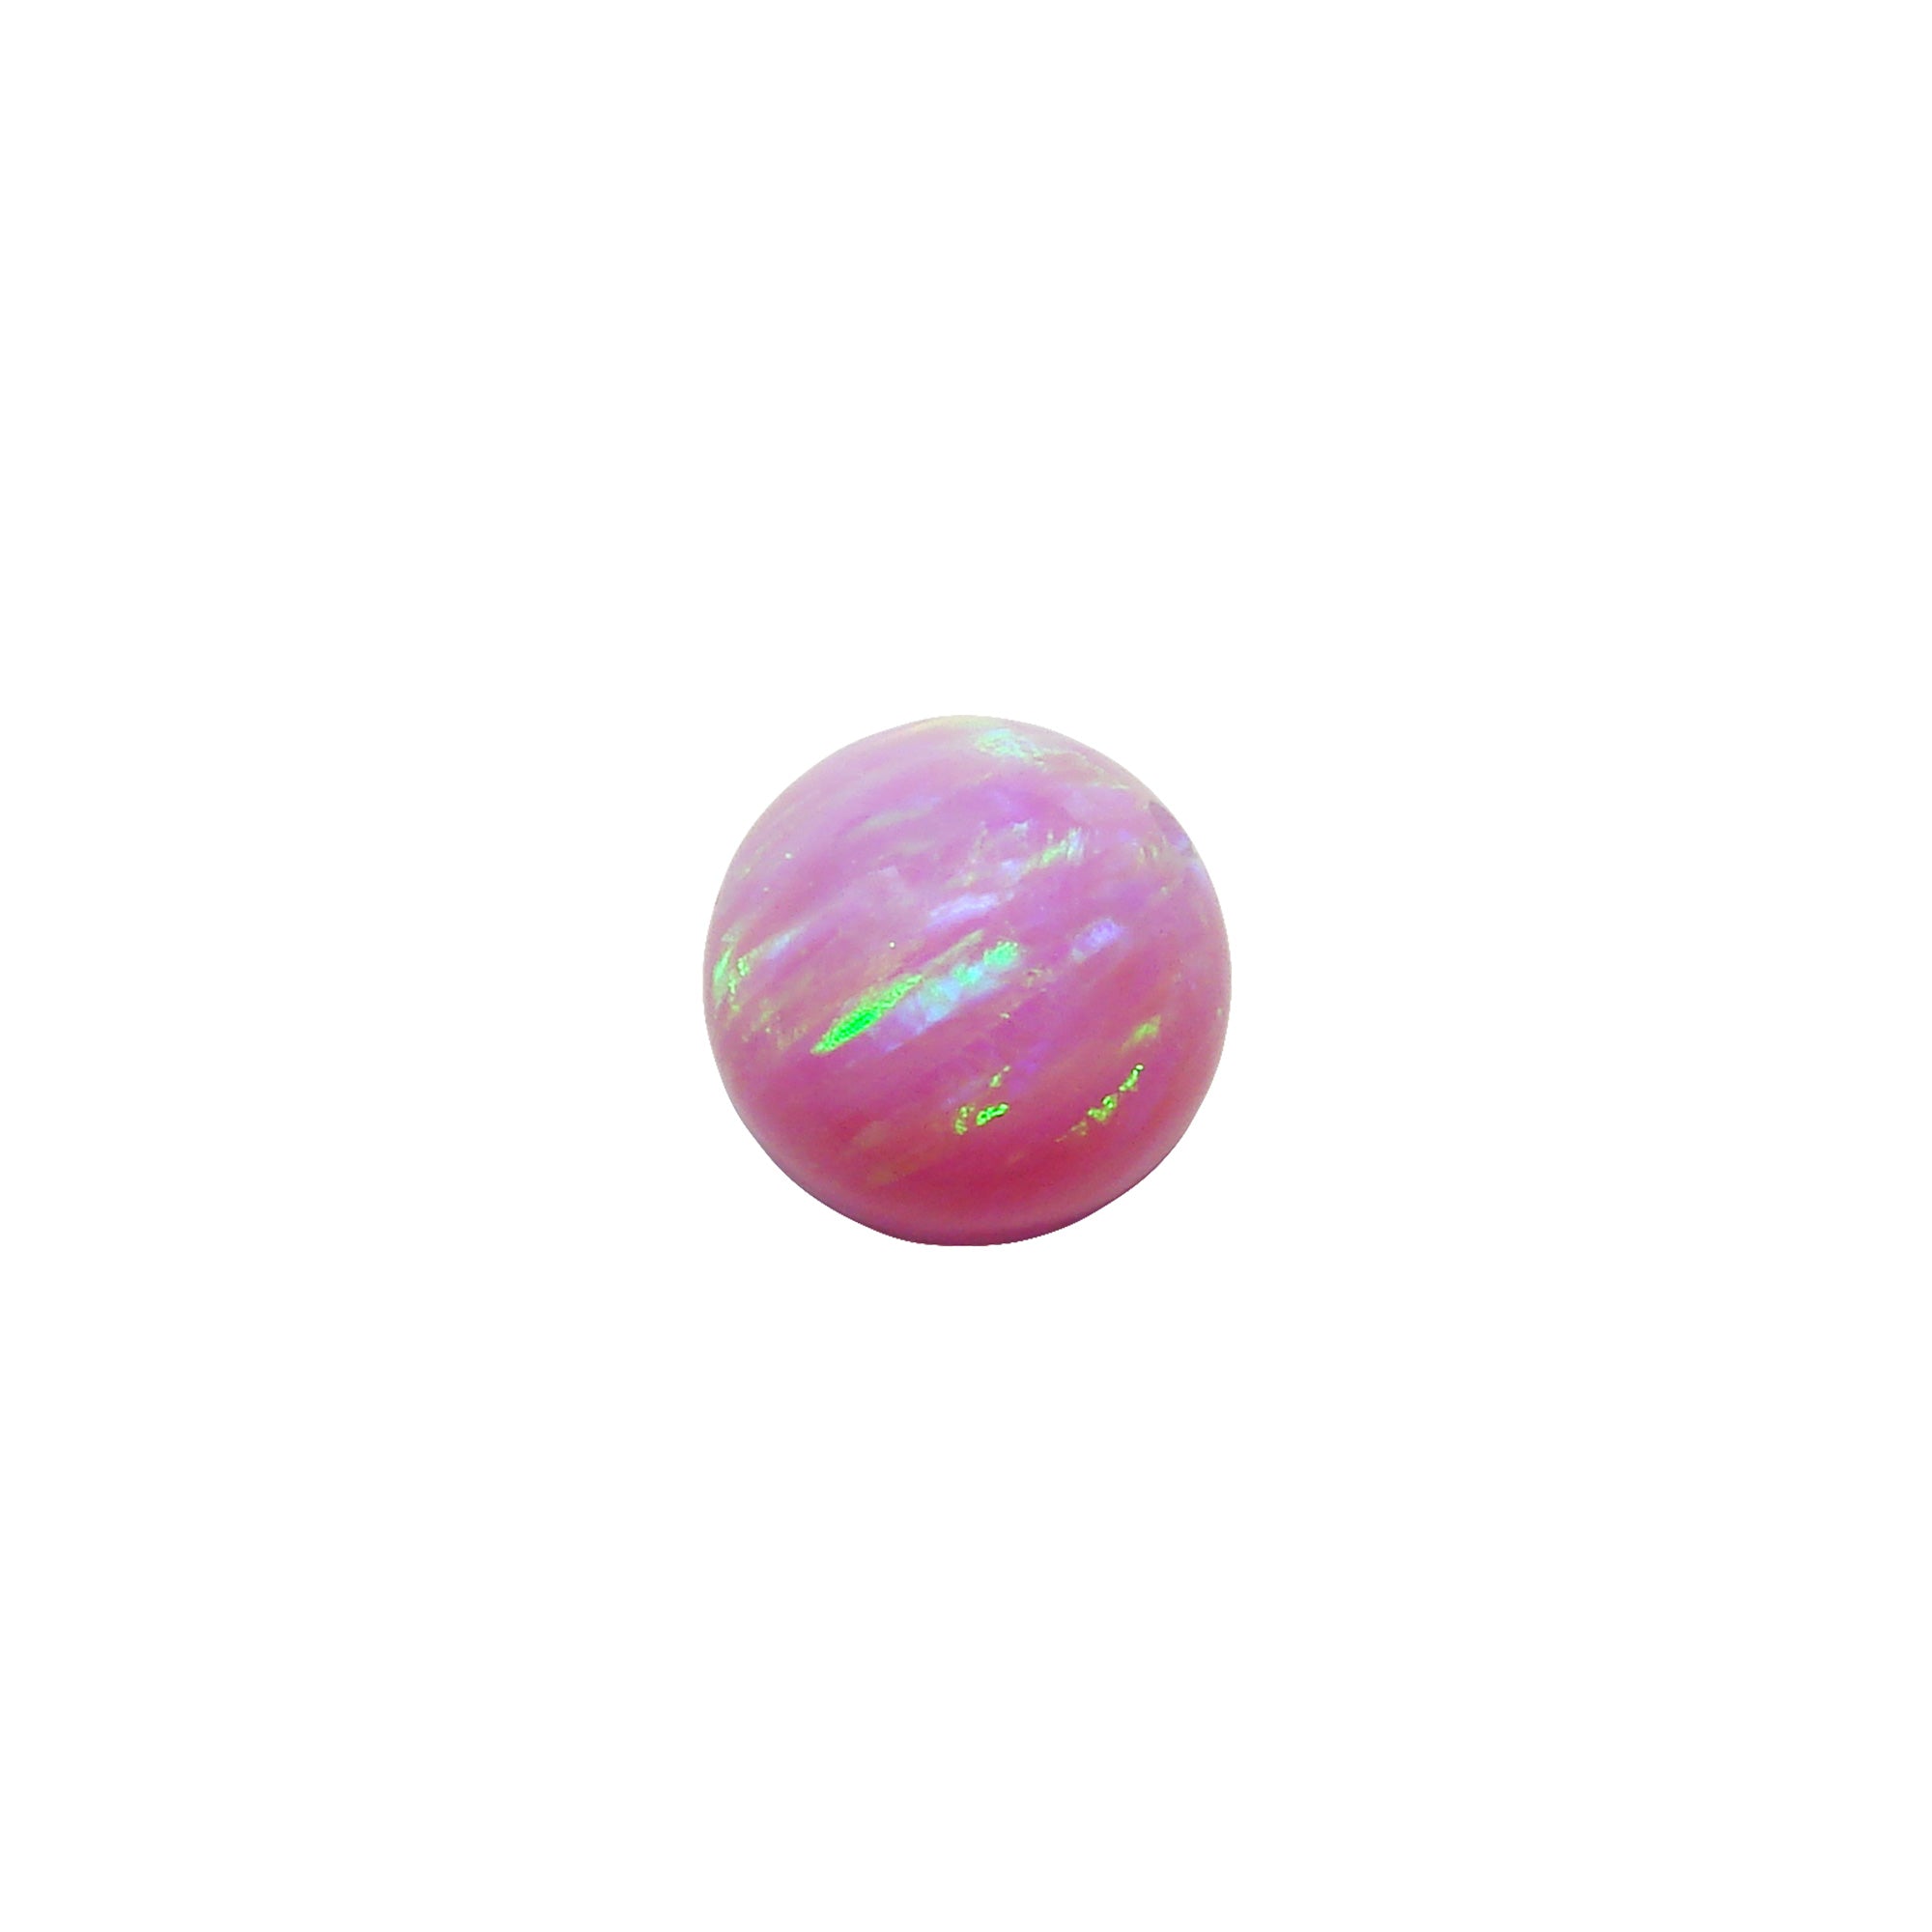 Authentic Lab-created Opal Round Beads 4mm.